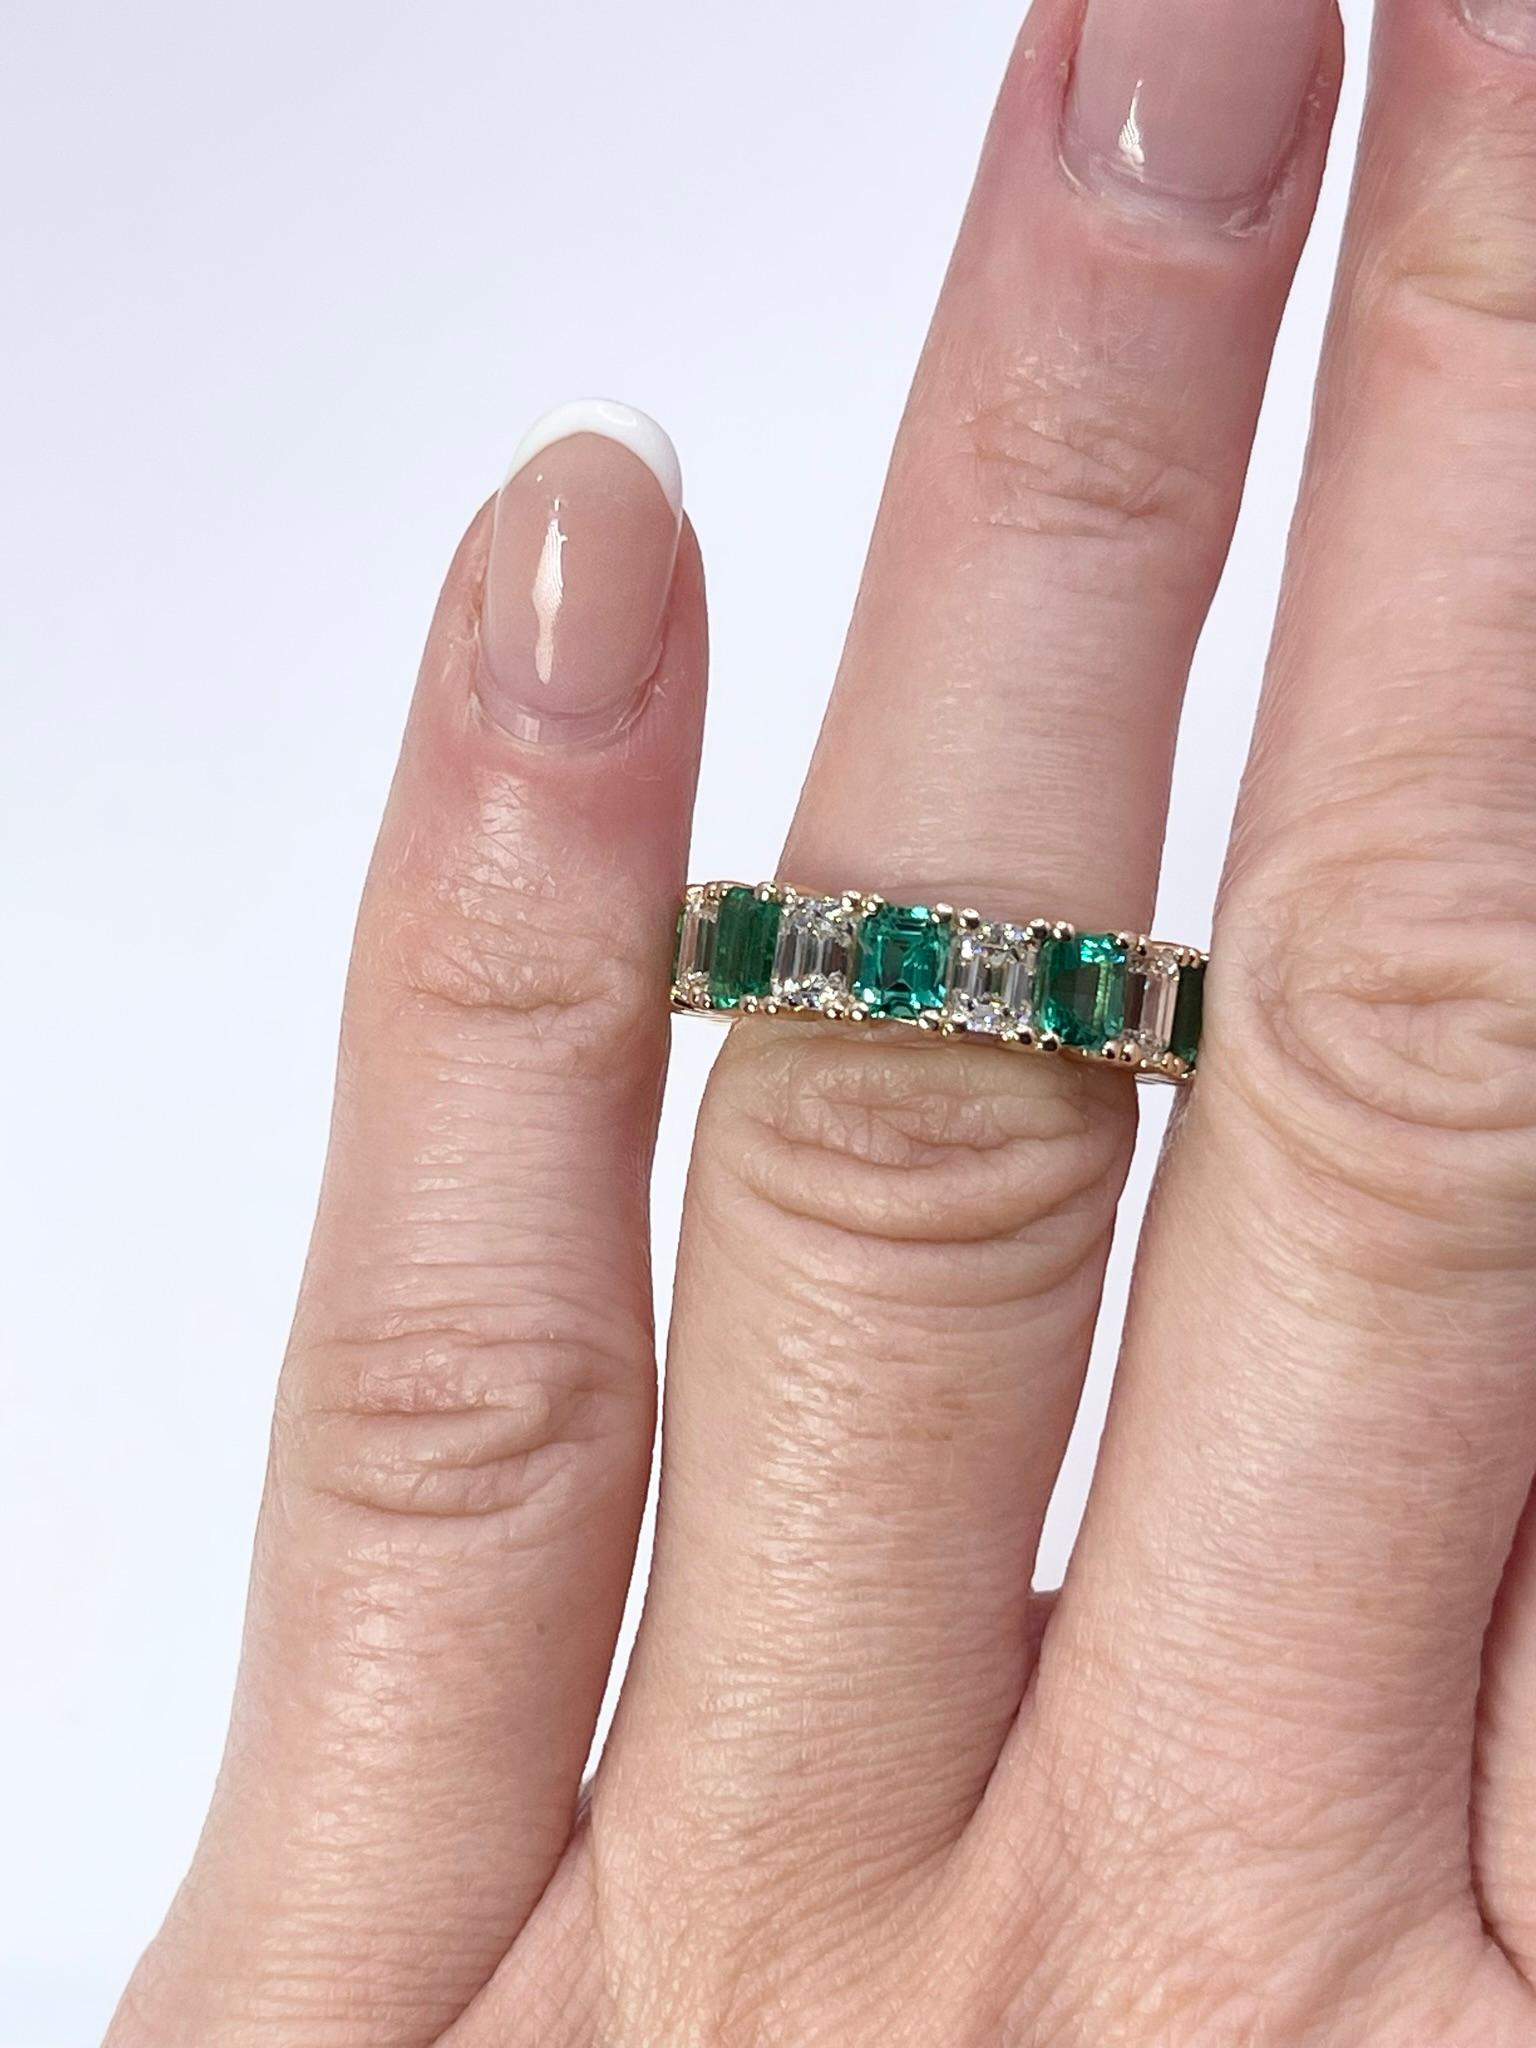 Rare combination to find! This incredible green emerald and diamond ring made in size 6 will leave you astonished, such a beautiful arrays of green and rainbow spakles!
Ring is made with approximately 2.5carats of diamonds and 4 carats of emeralds